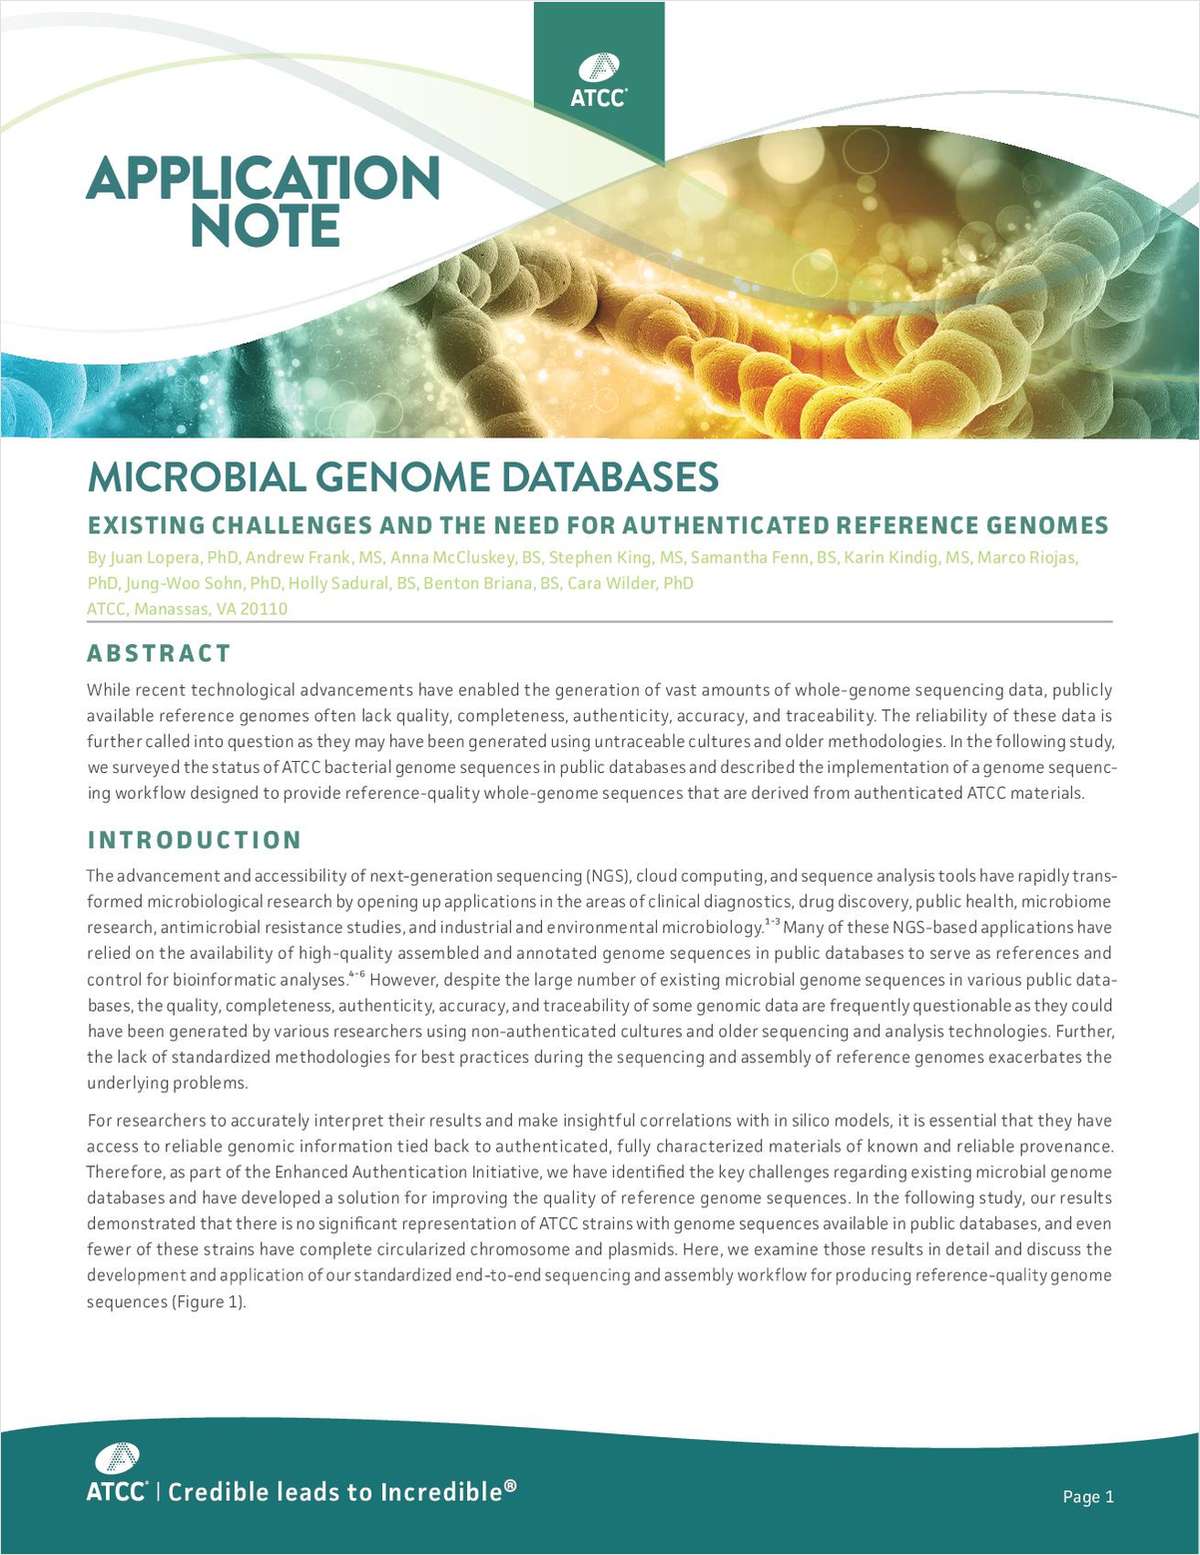 Microbial Genome Databases: Existing Challenges and the Need for Authenticated Reference Genomes